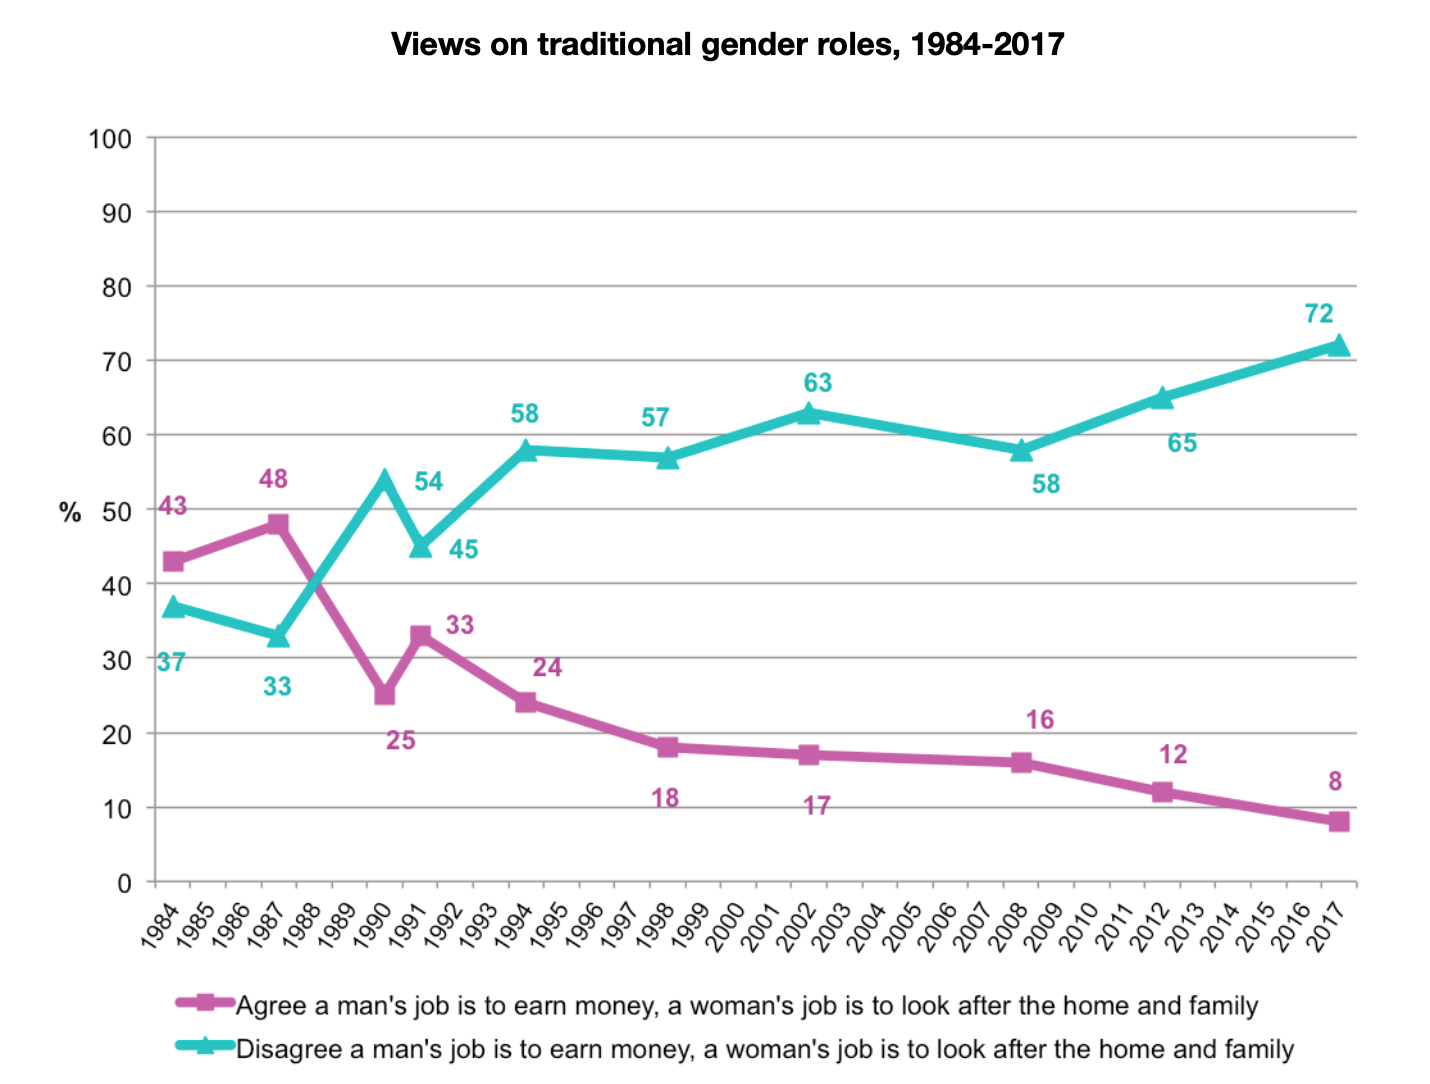 View on traditional gender roles spanning from 1984 to 2017